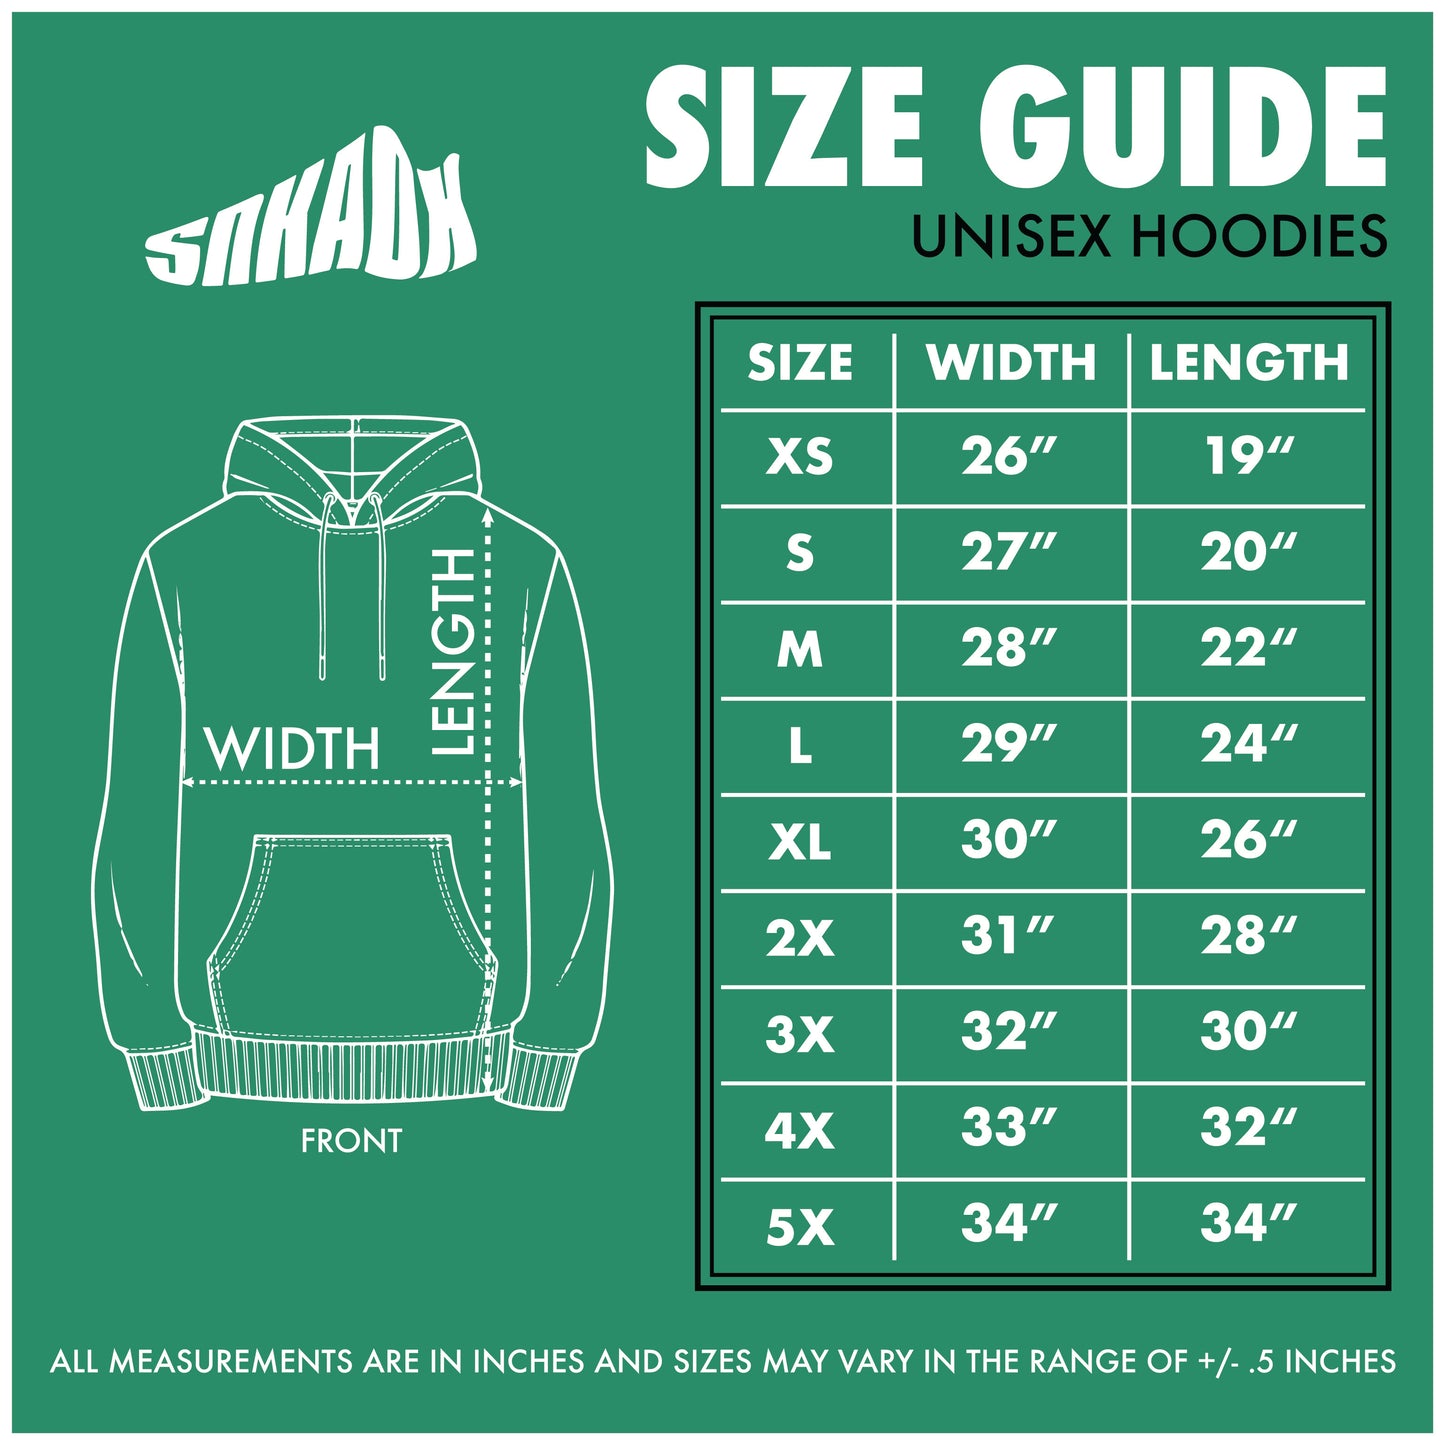 Illustrated size guide for adult unisex hoodie, providing measurements and a chart to determine the correct fit. Includes guidance on measuring shoulder width and torso length. Helpful tips for selecting the right size based on body type.